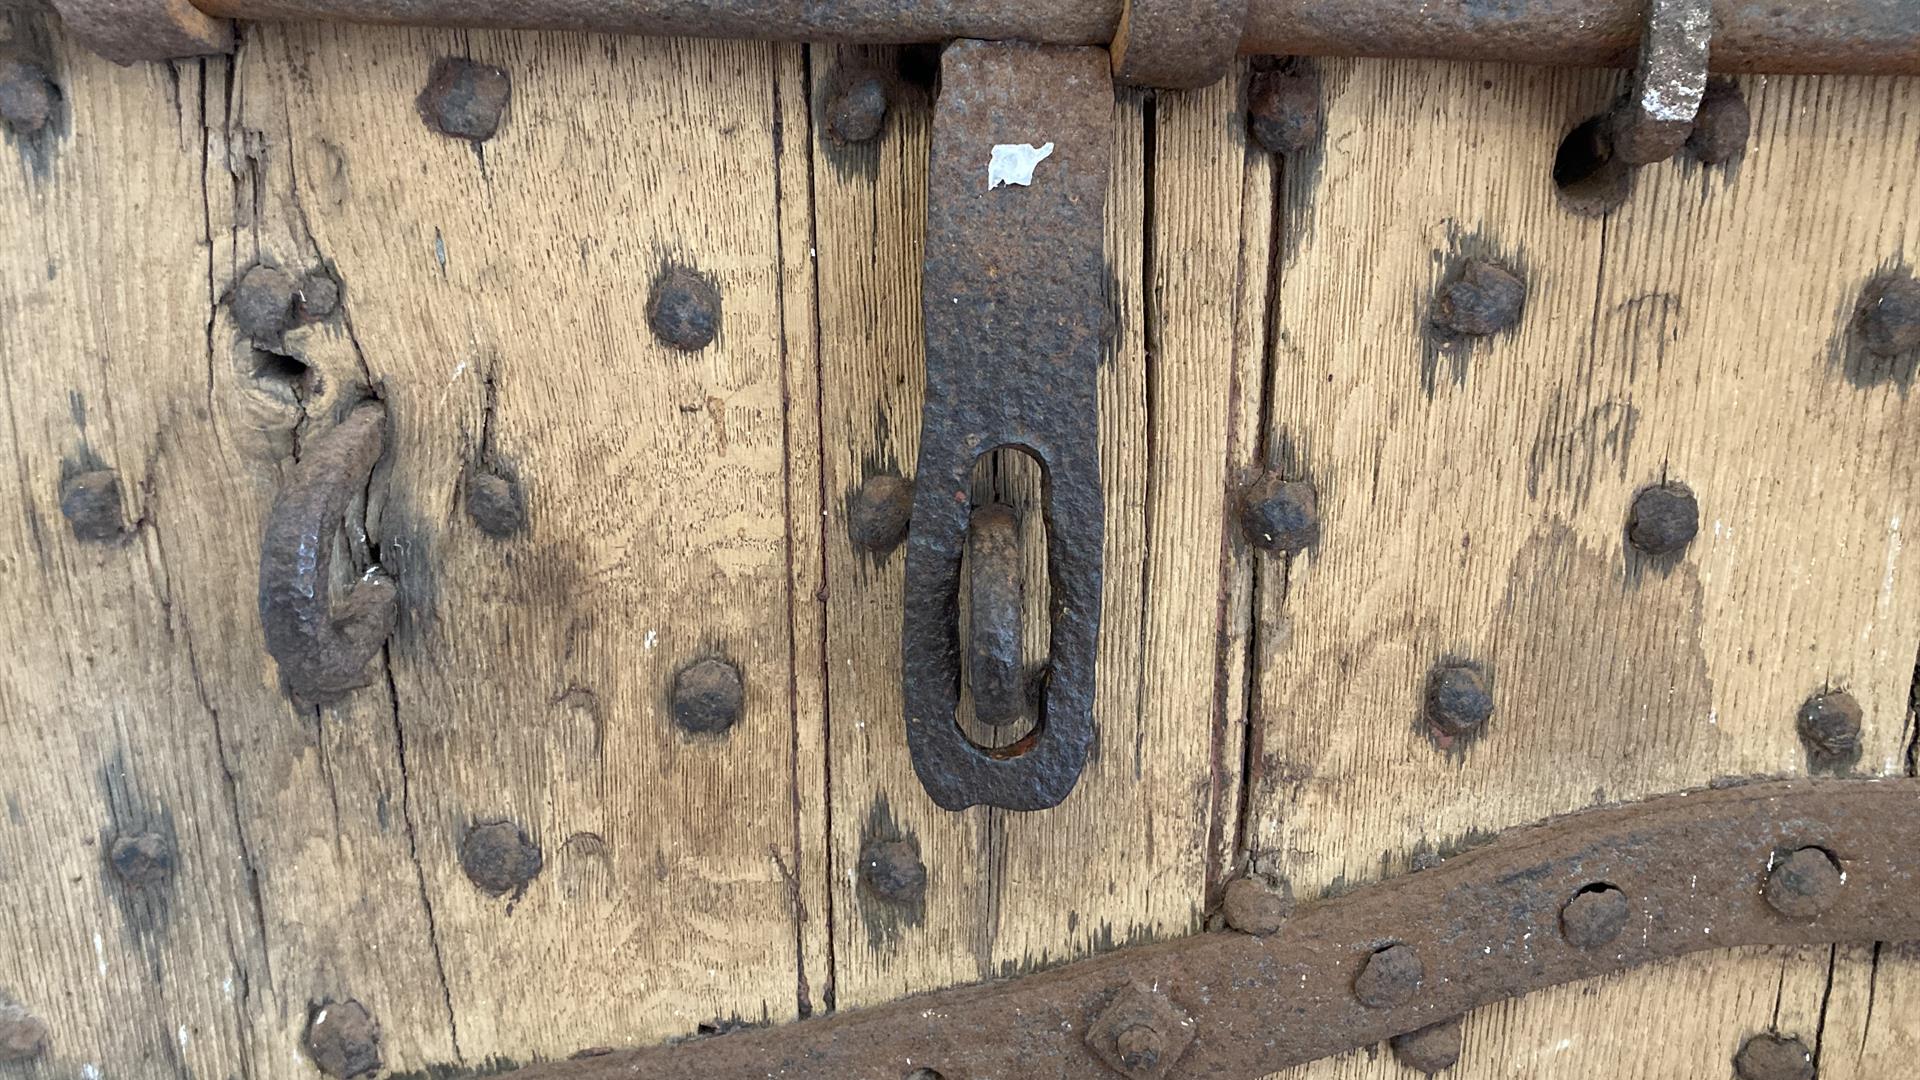 A section of reinforced wooden door form the old gaol, now Down County Museum, where Thomas Russell was held prior to his execution. The wooden door h